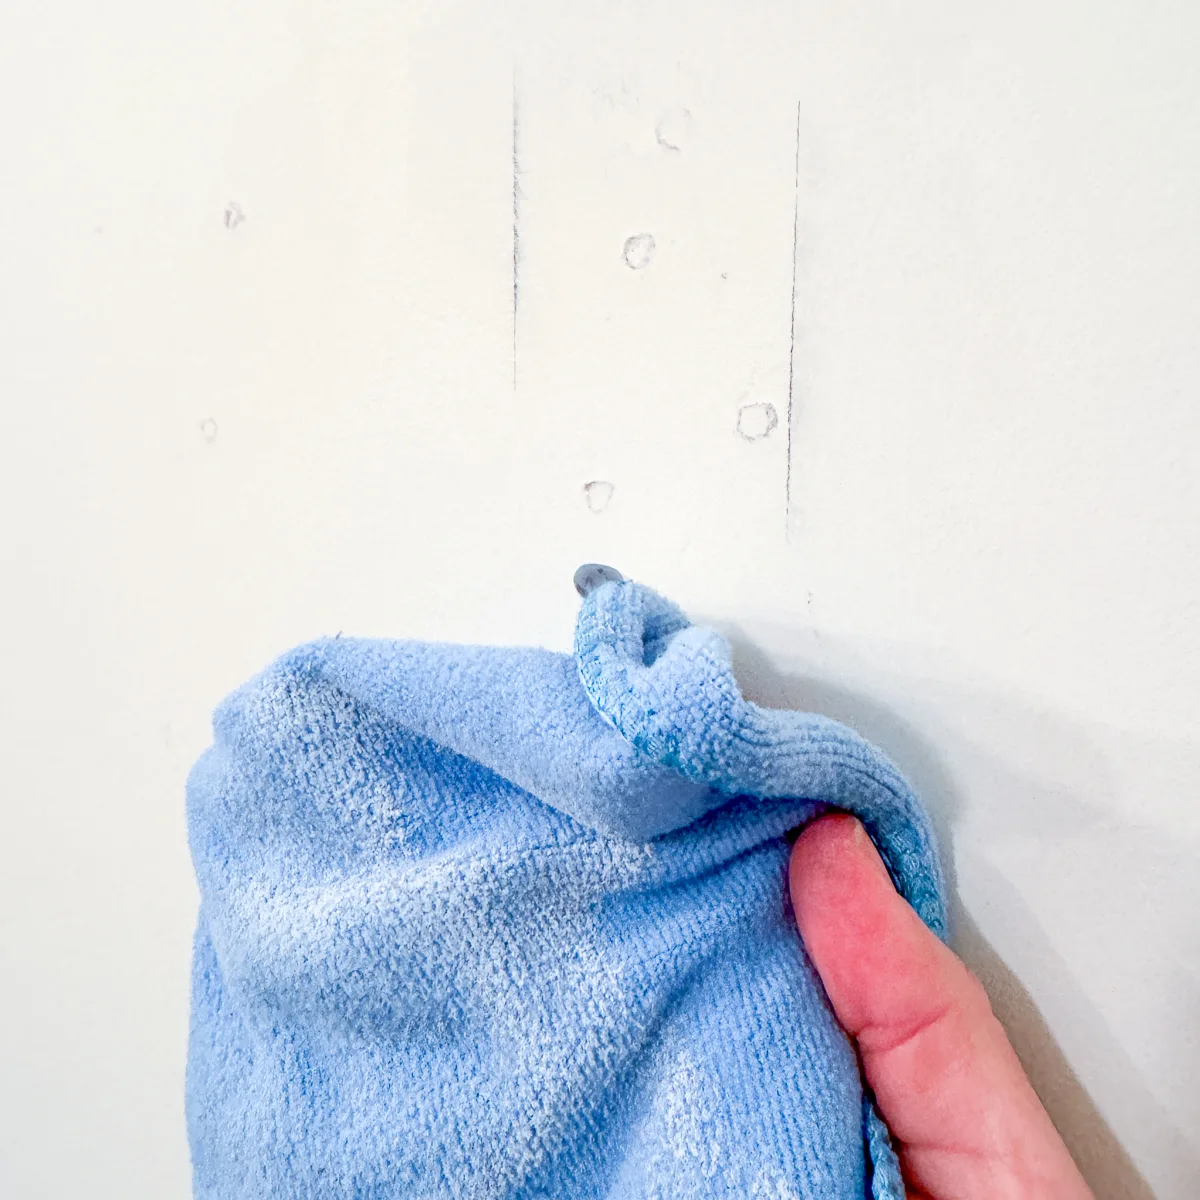 removing dust from the wall with a blue microfiber cloth after sanding down spackle